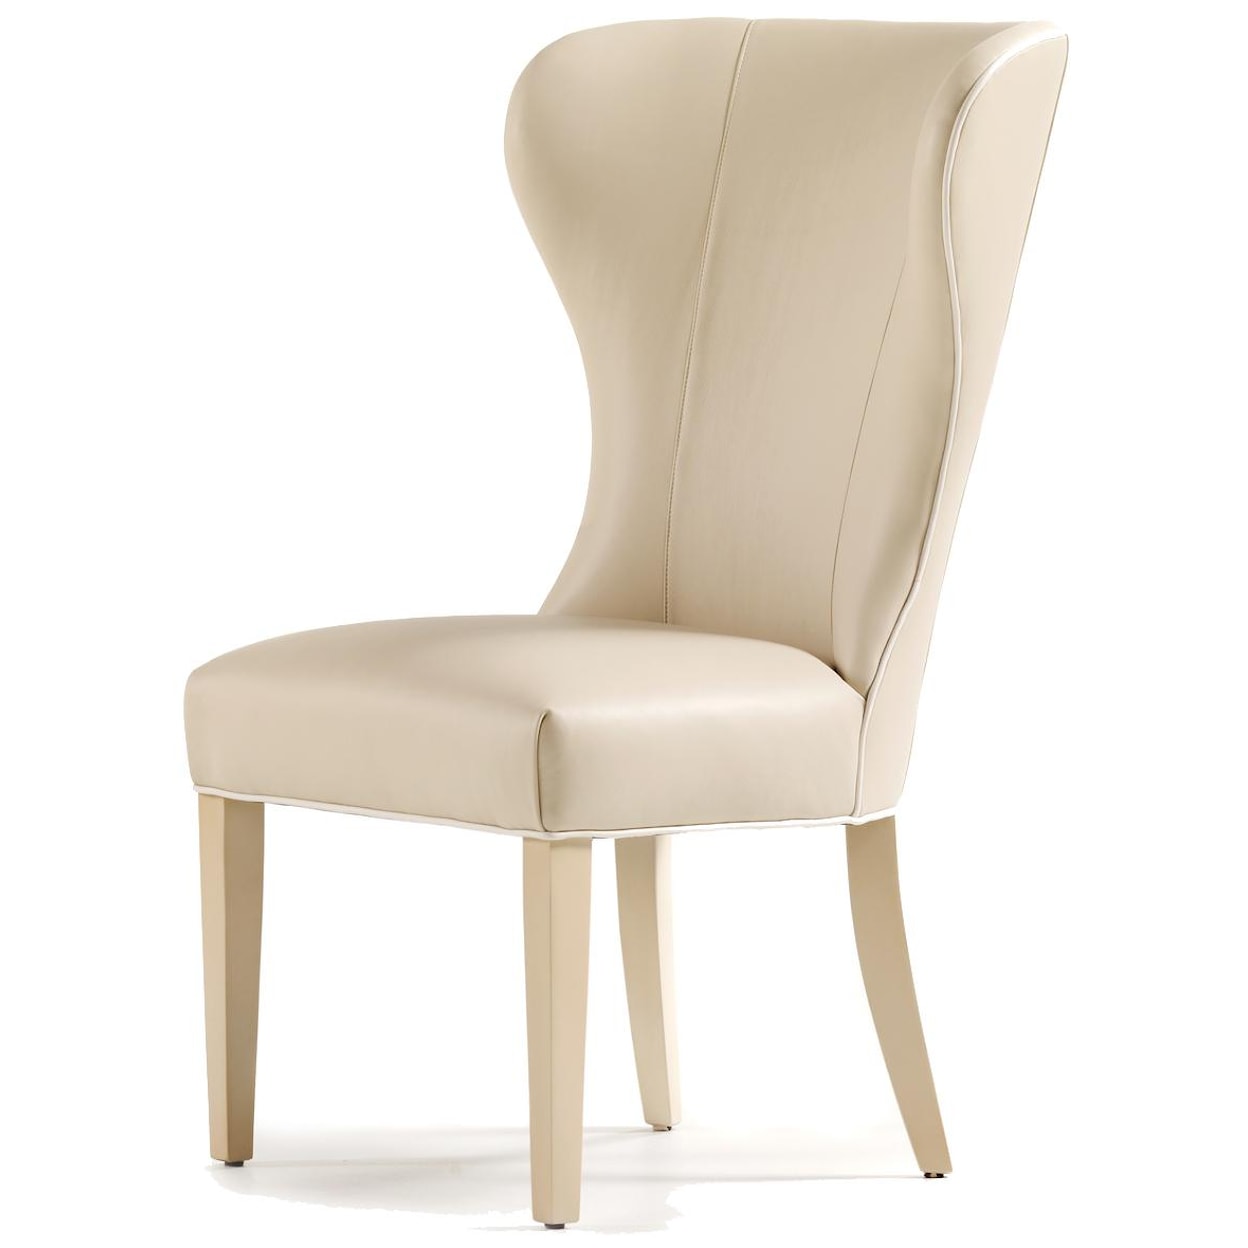 Jessica Charles Fine Upholstered Accents Garbo Dining Side Chair   